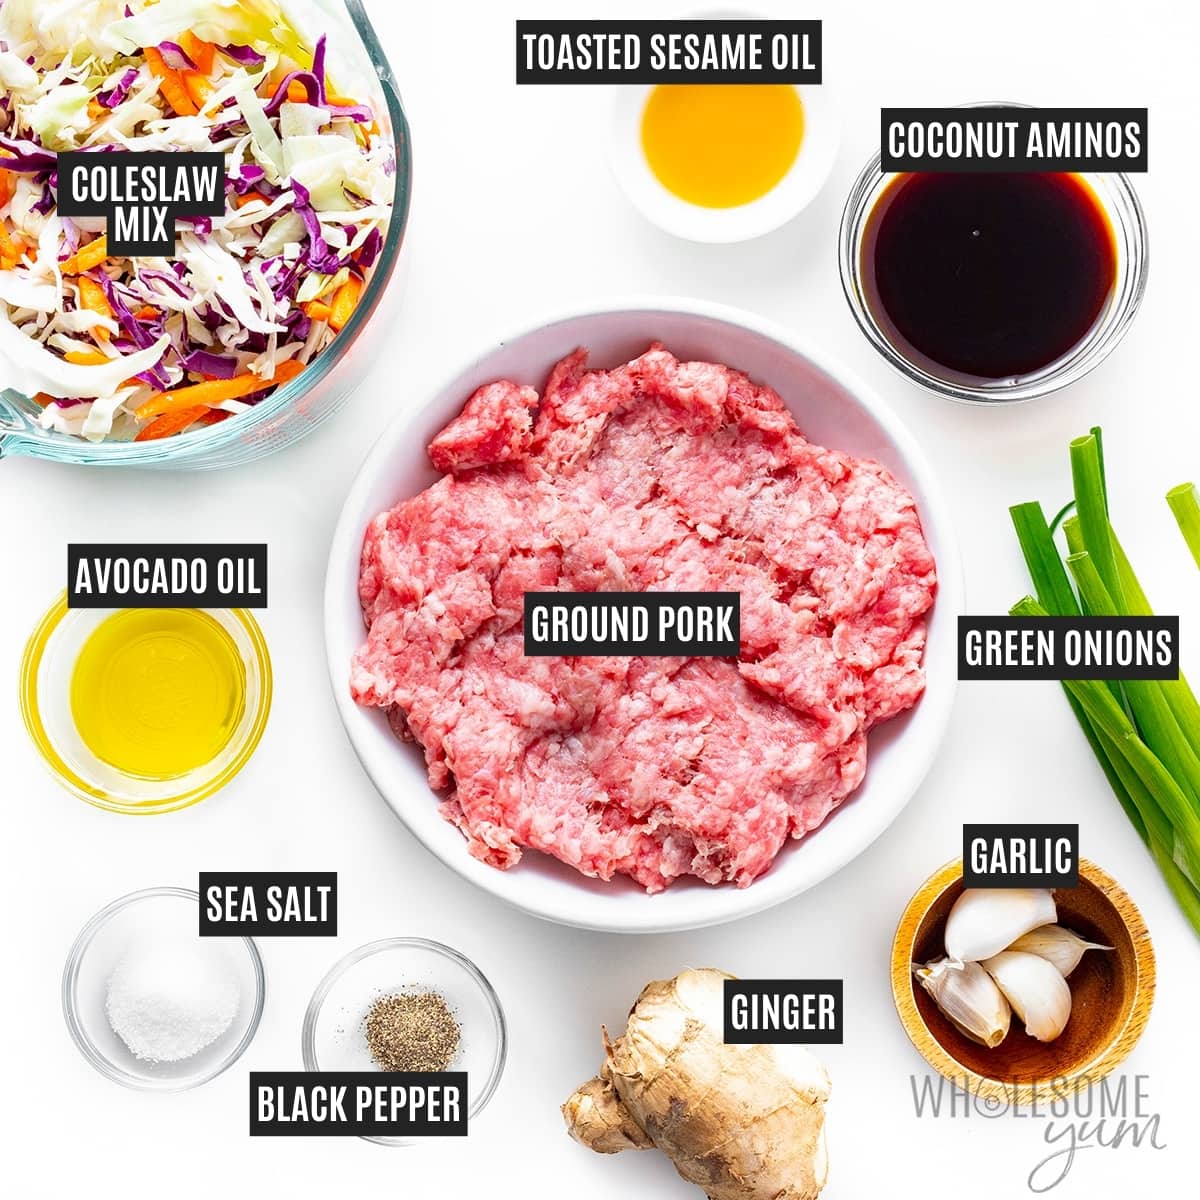 Ground sausage in a bowl next to cabbage, garlic, ginger, and other recipe ingredients.